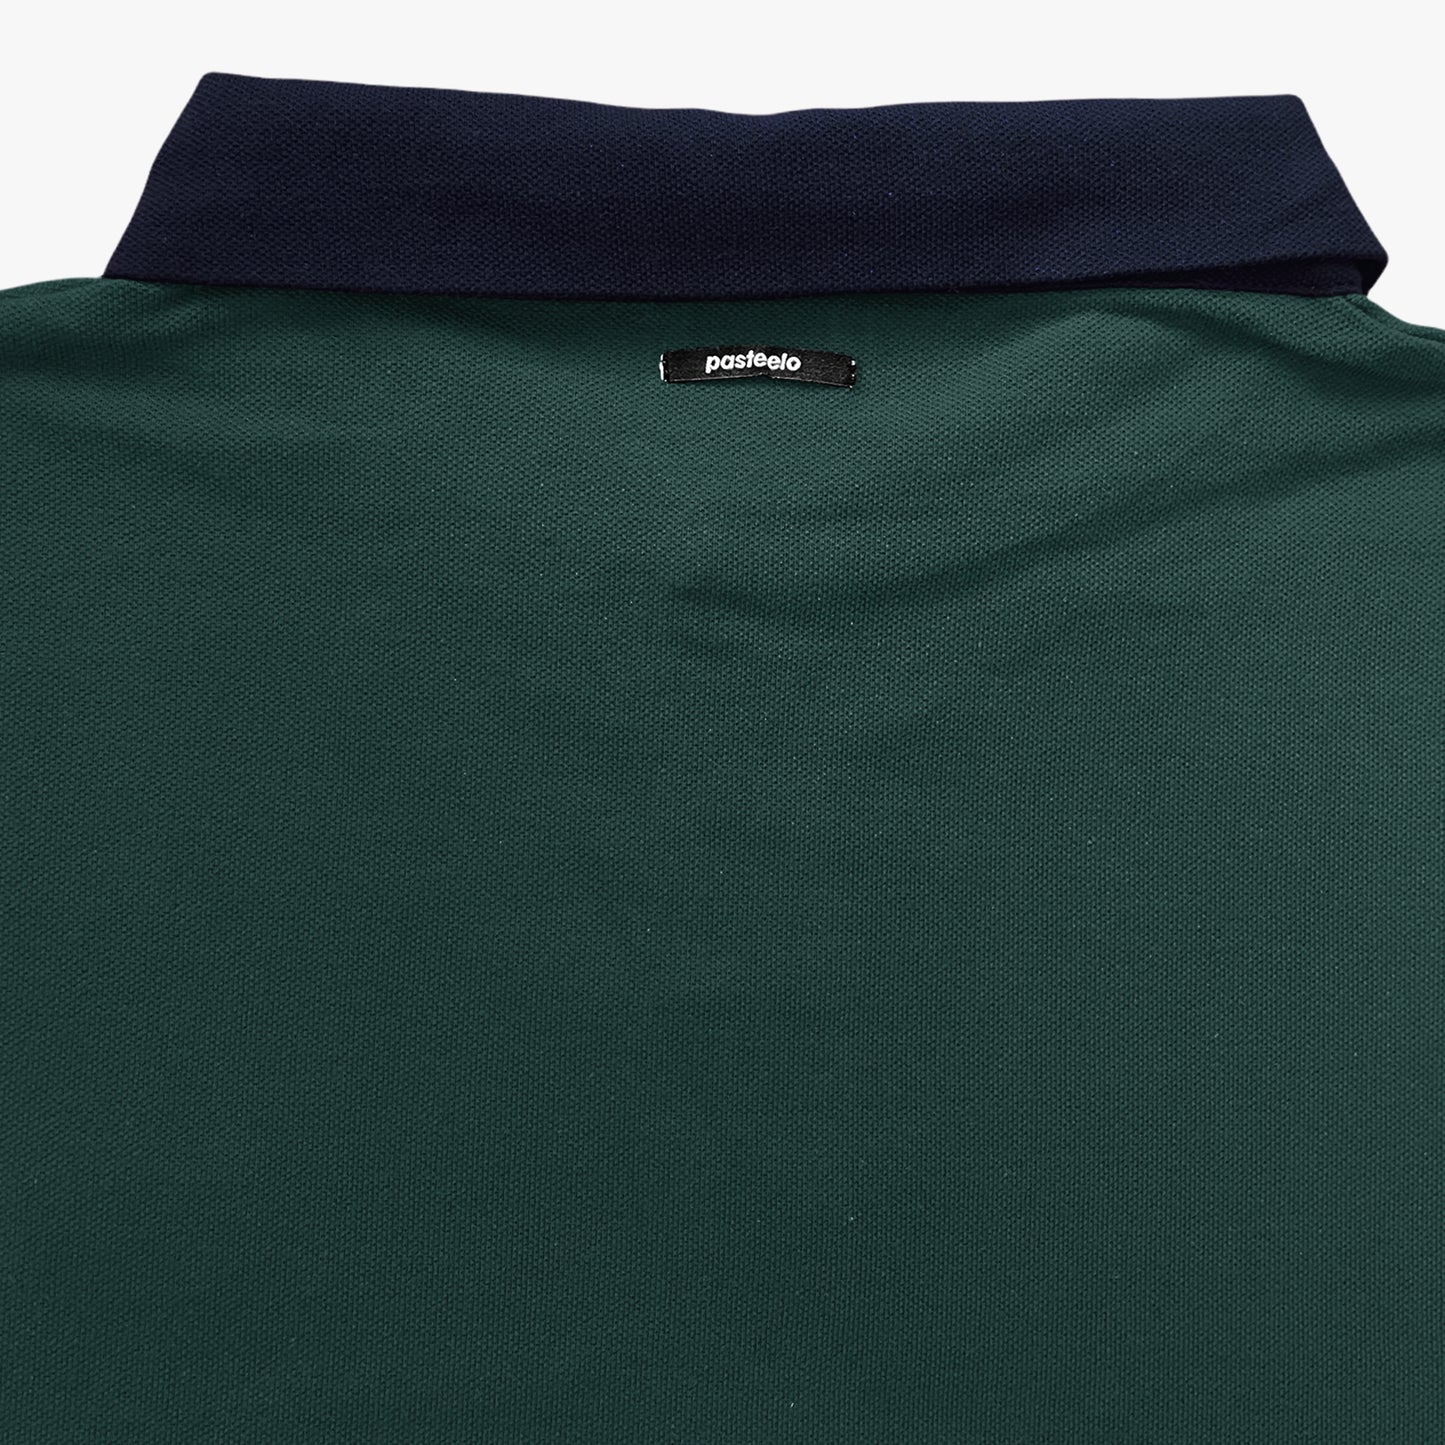 POLO SHIRT L/S - FOREST/NAVY